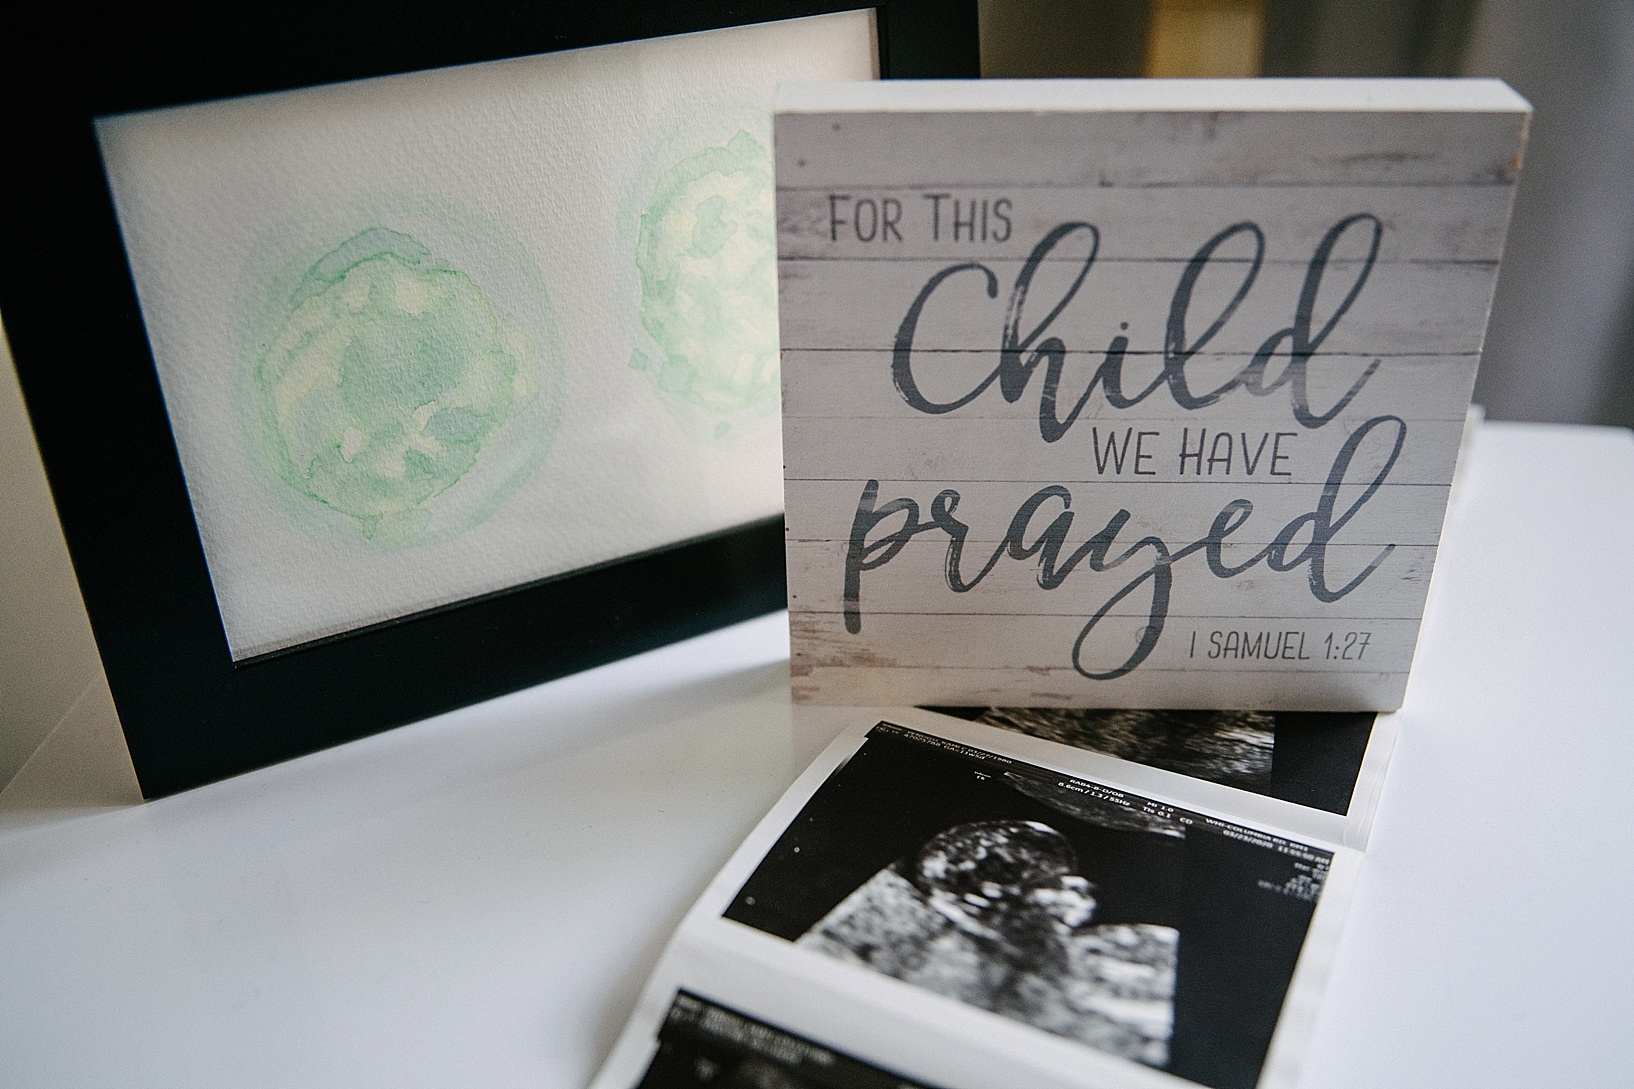 For this child we have prayed sign next to ultrasound